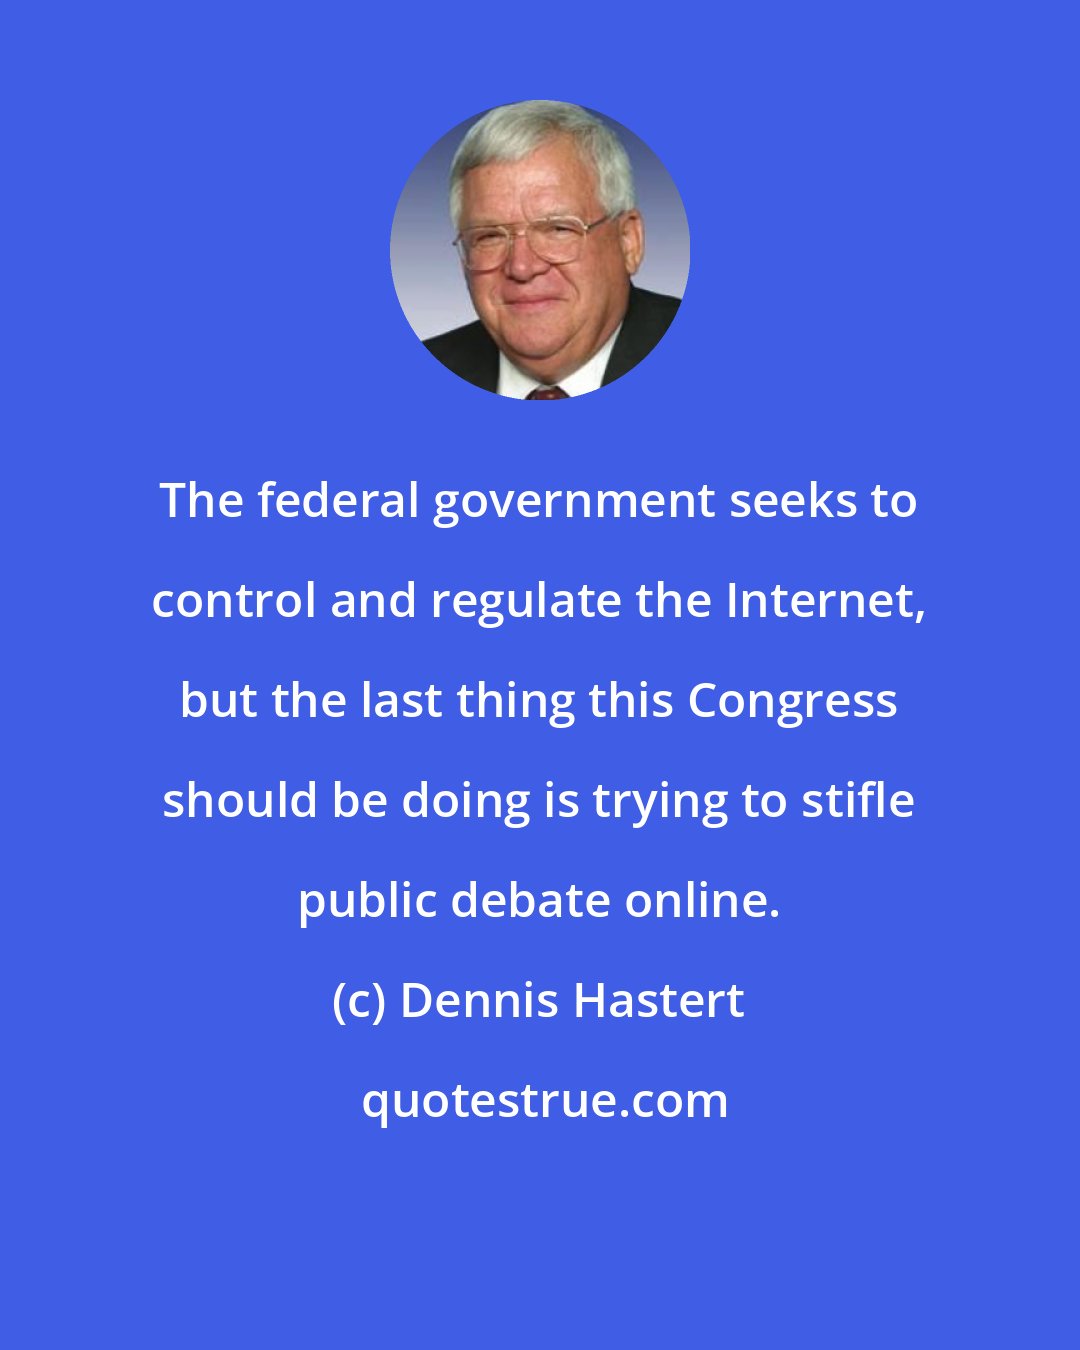 Dennis Hastert: The federal government seeks to control and regulate the Internet, but the last thing this Congress should be doing is trying to stifle public debate online.